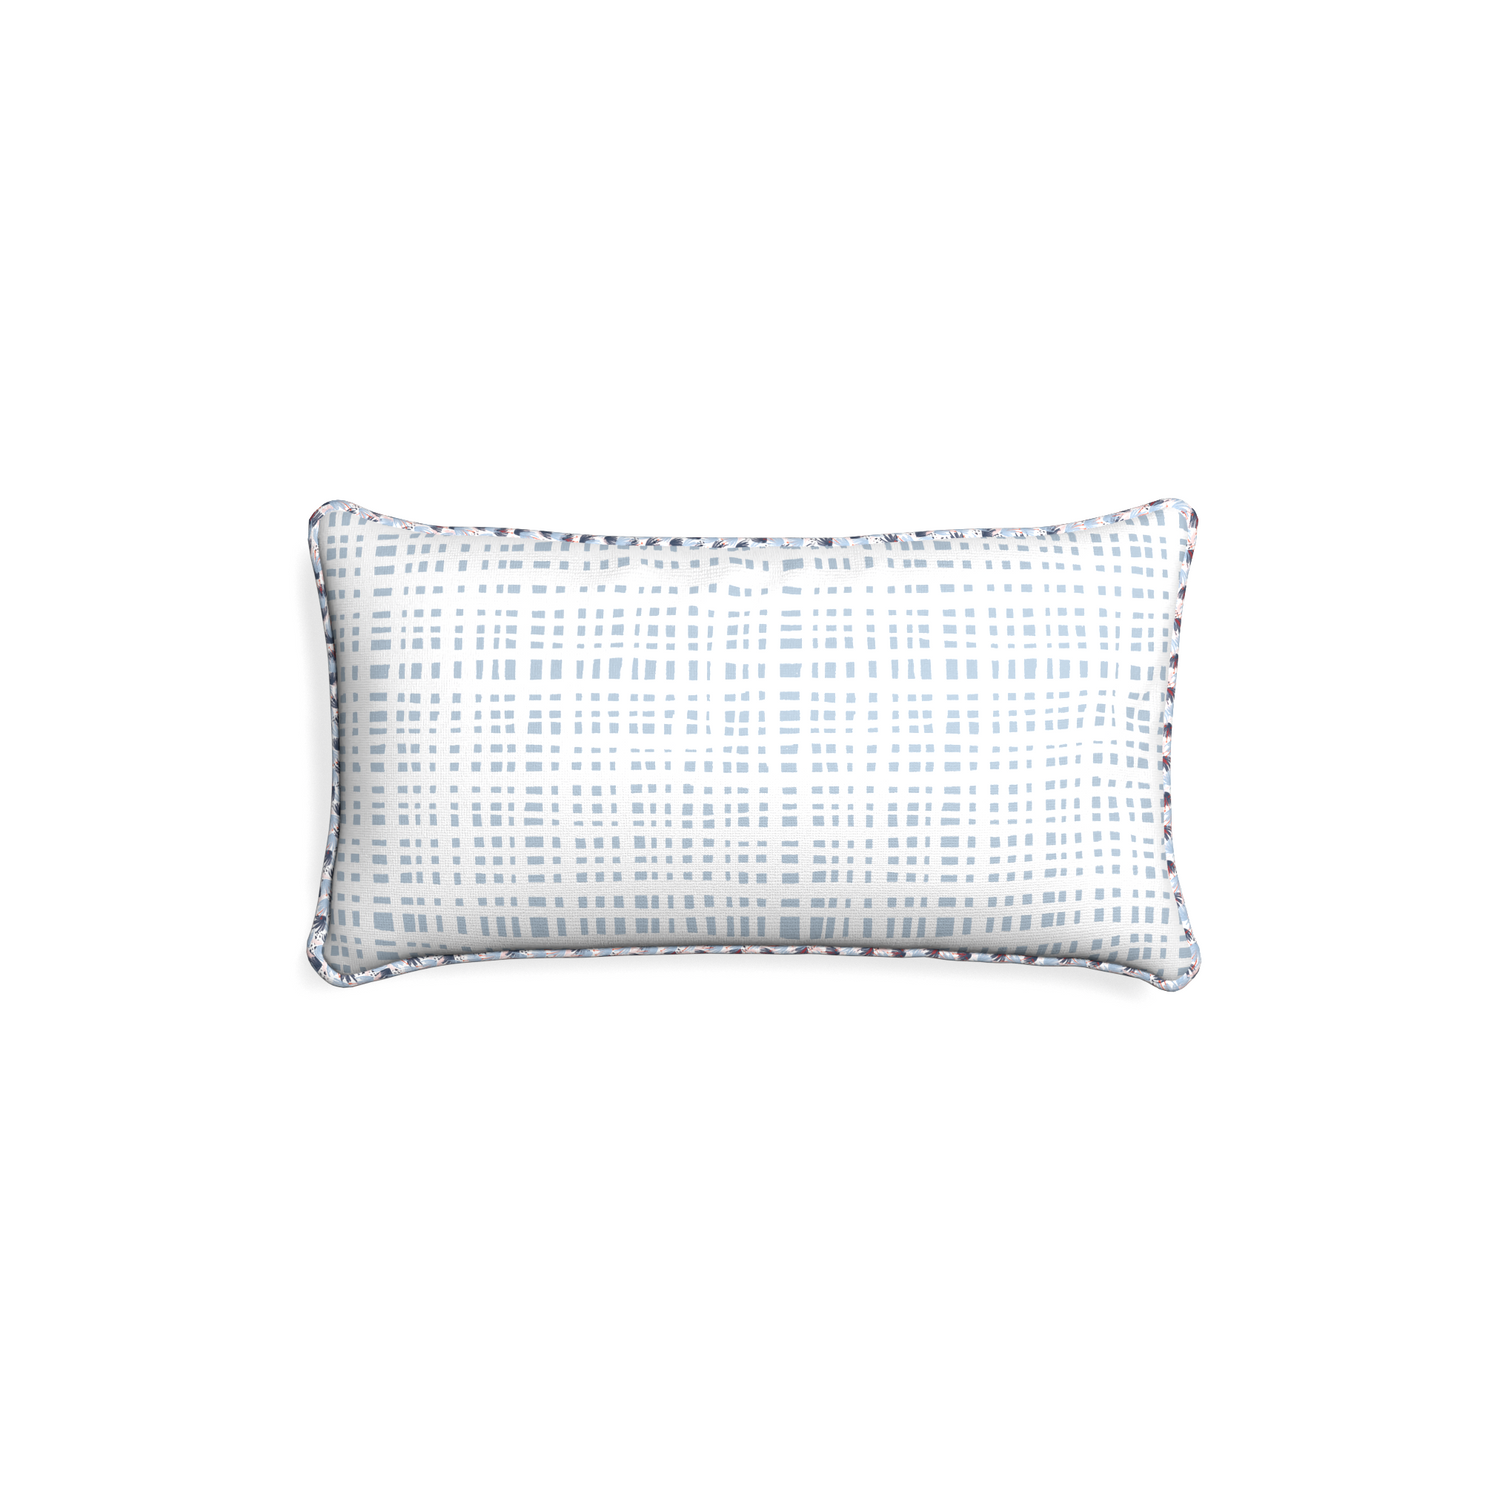 Petite-lumbar ginger sky custom plaid sky bluepillow with e piping on white background